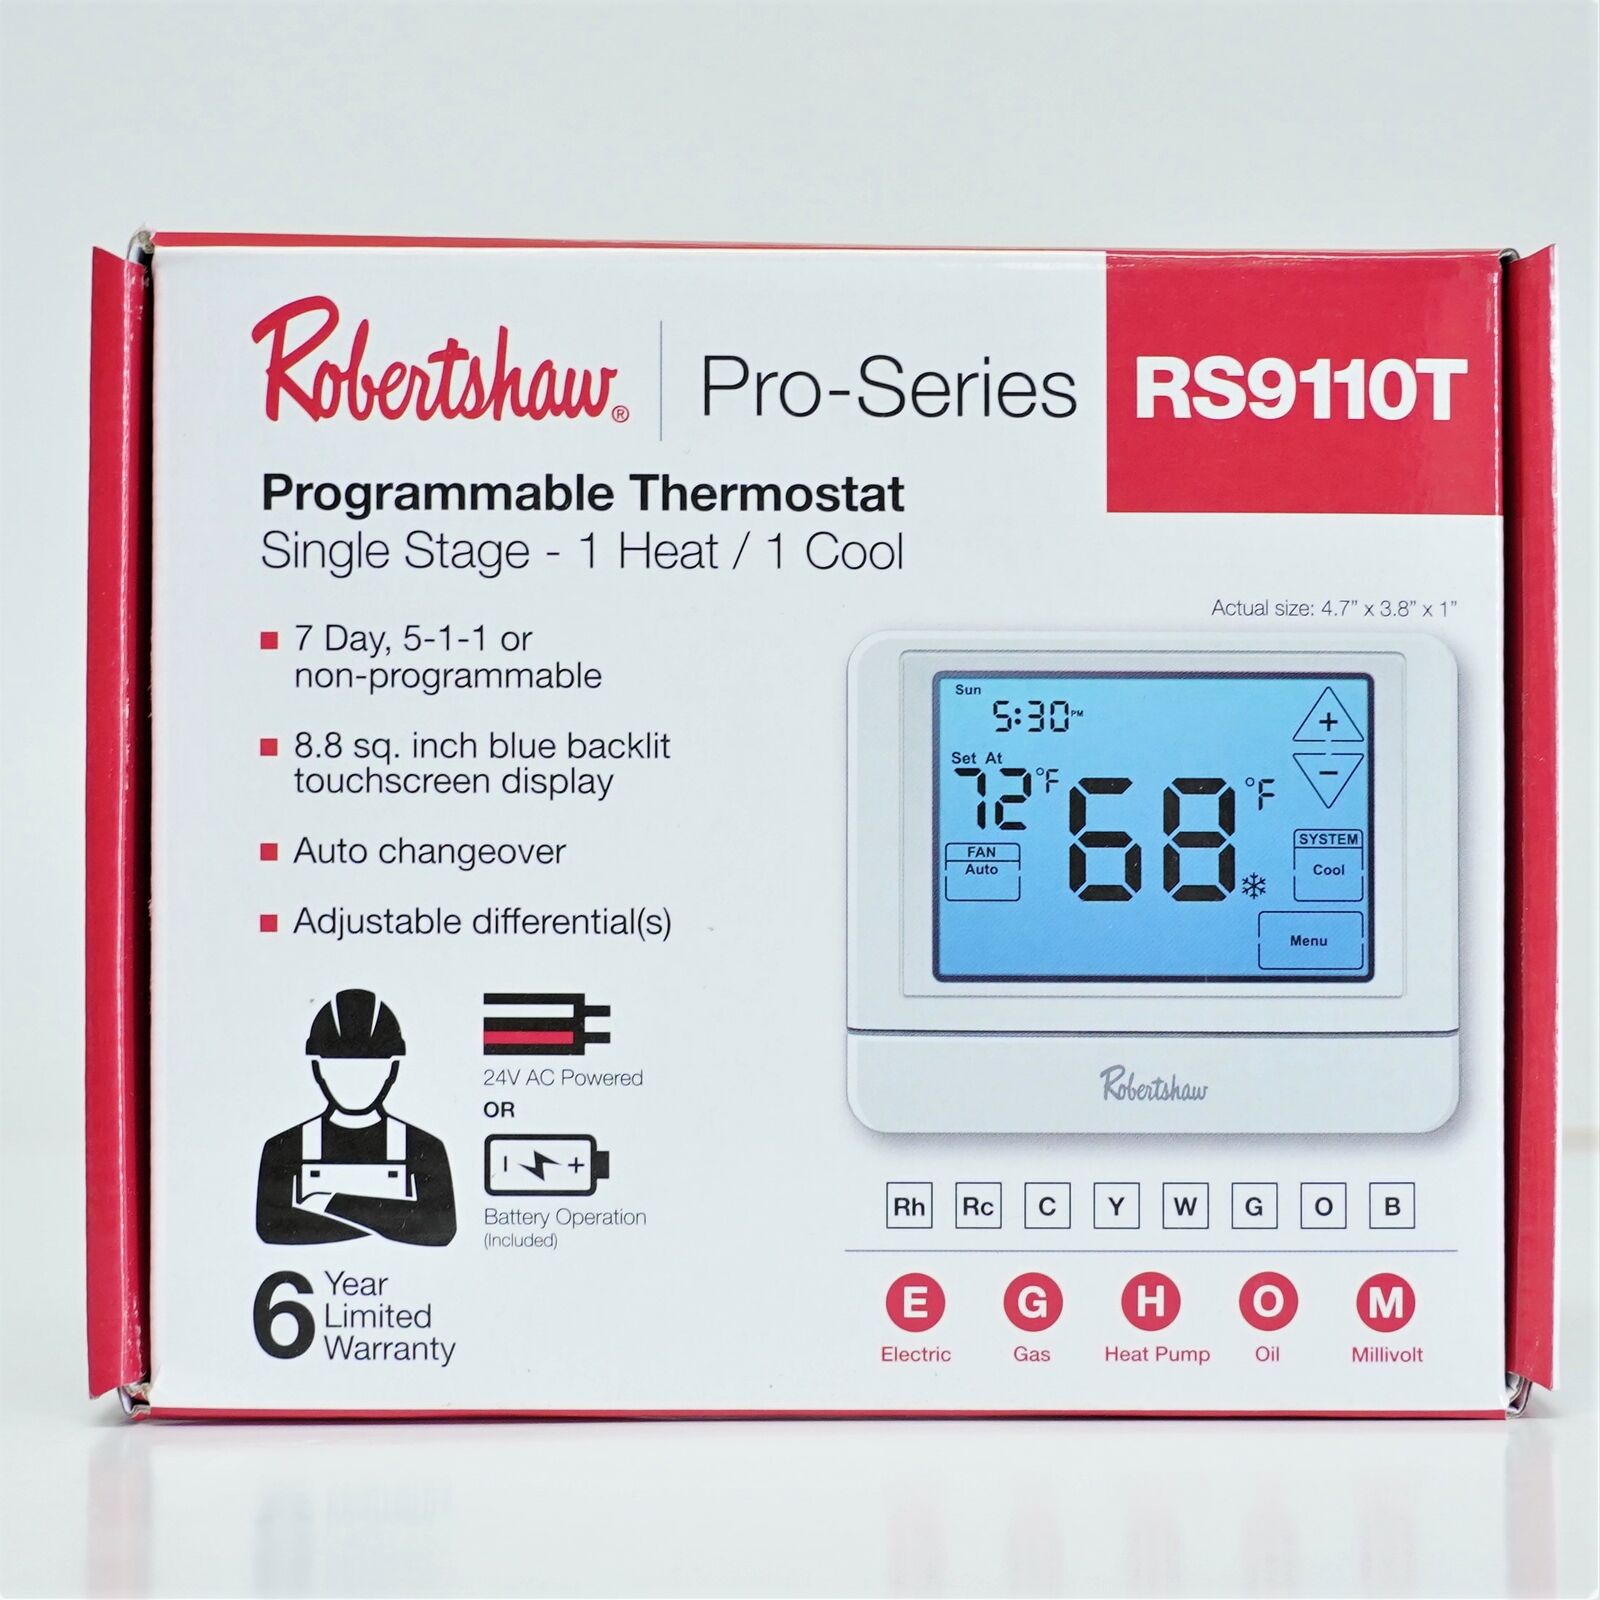 Robertshaw RS9110T Programmable Wall Thermostat 1 Heat 1 Cool Touchscreen